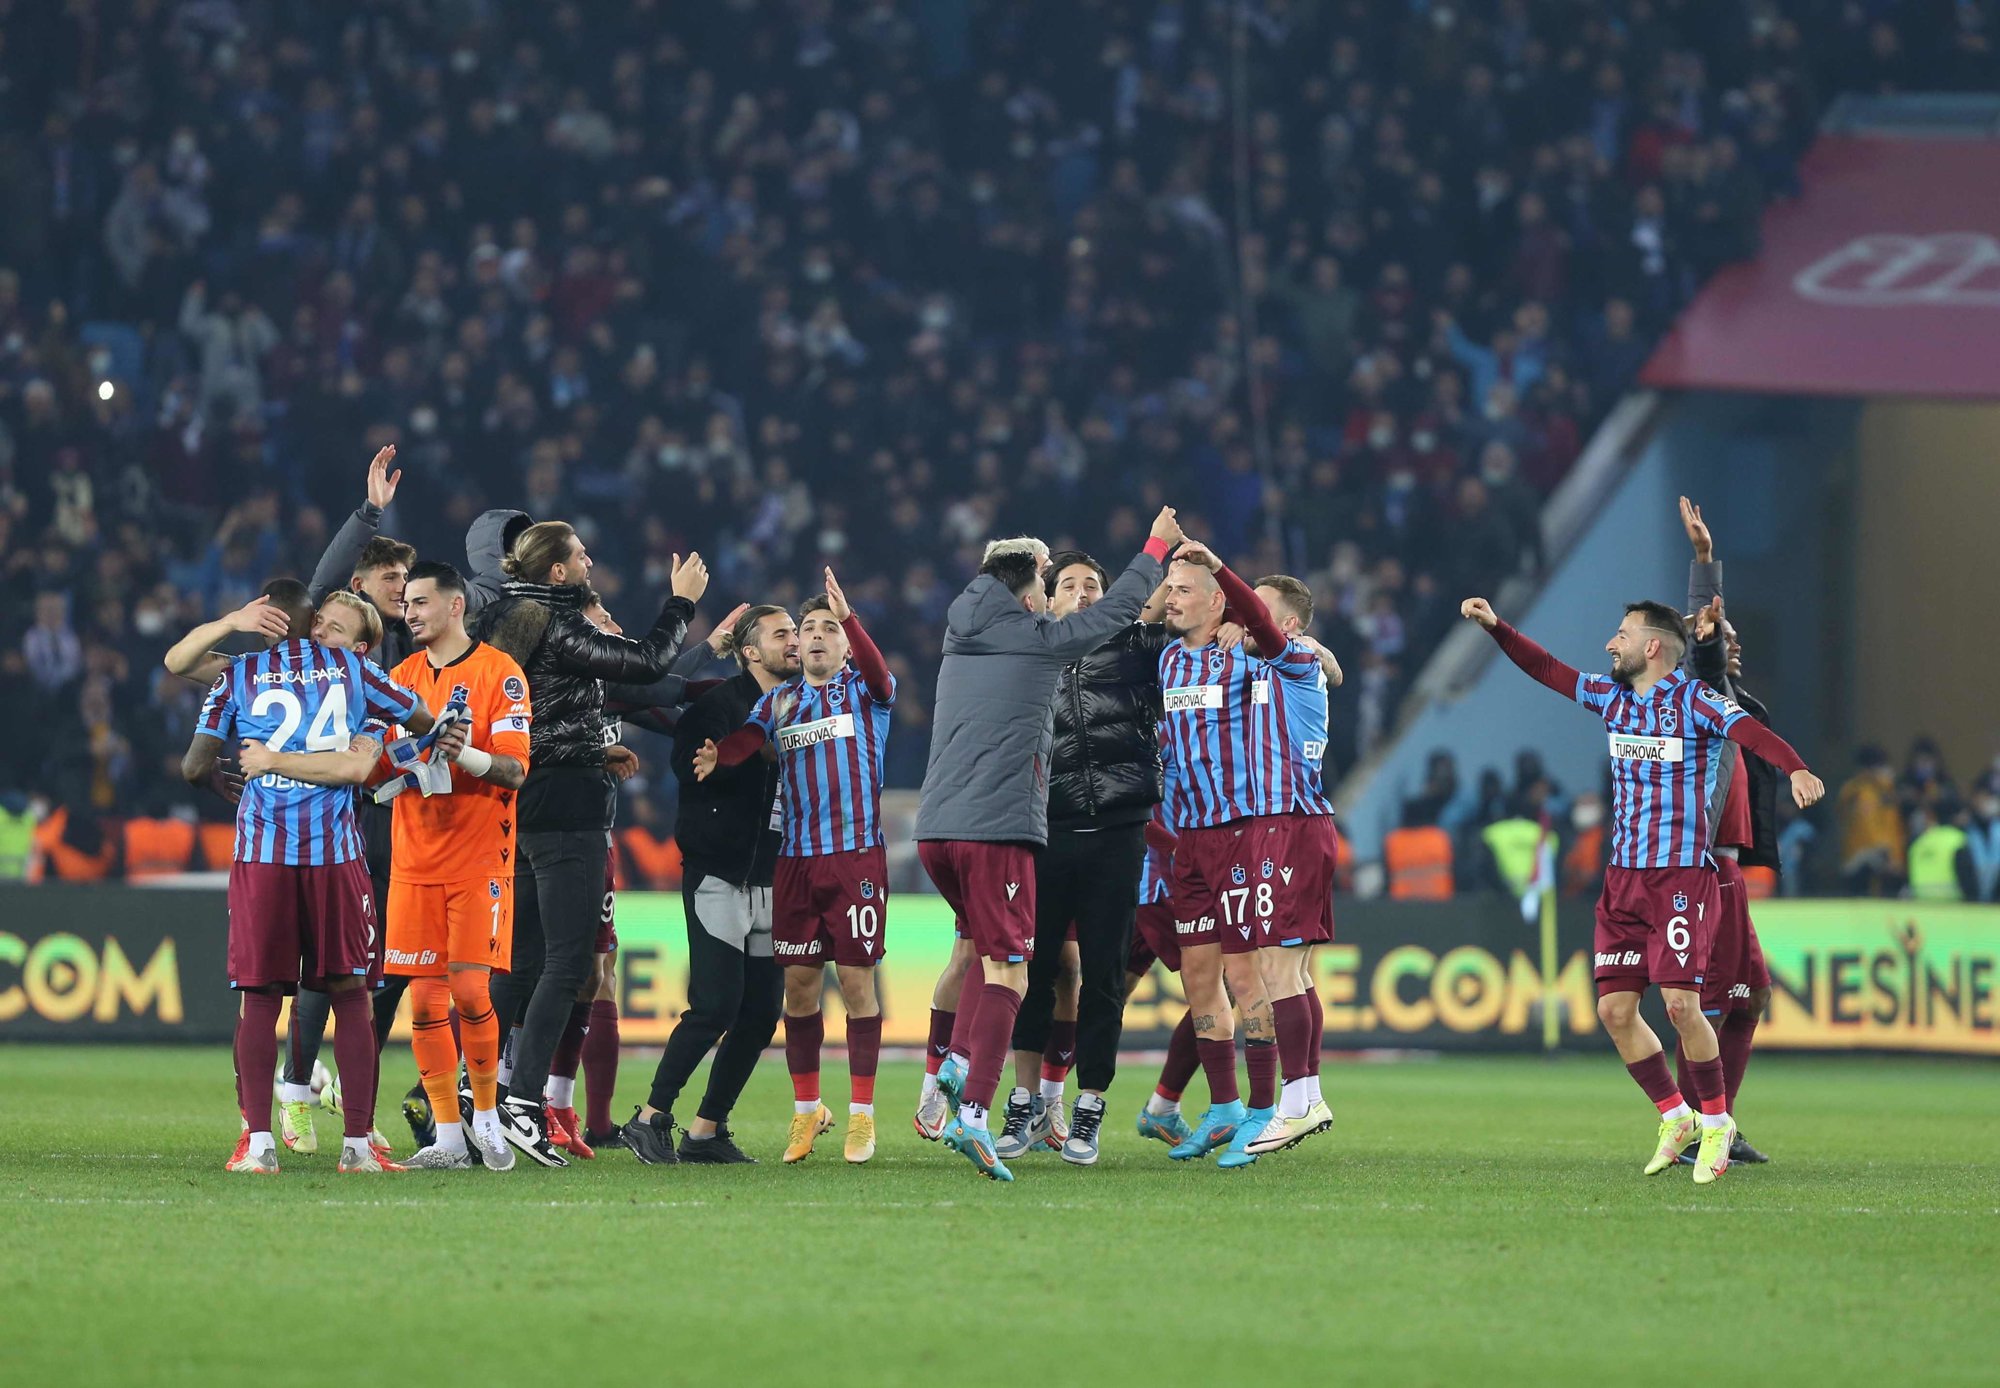 Trabzonspor lifts the Turkish league for the first time since 1984 - None of their current squad was born then